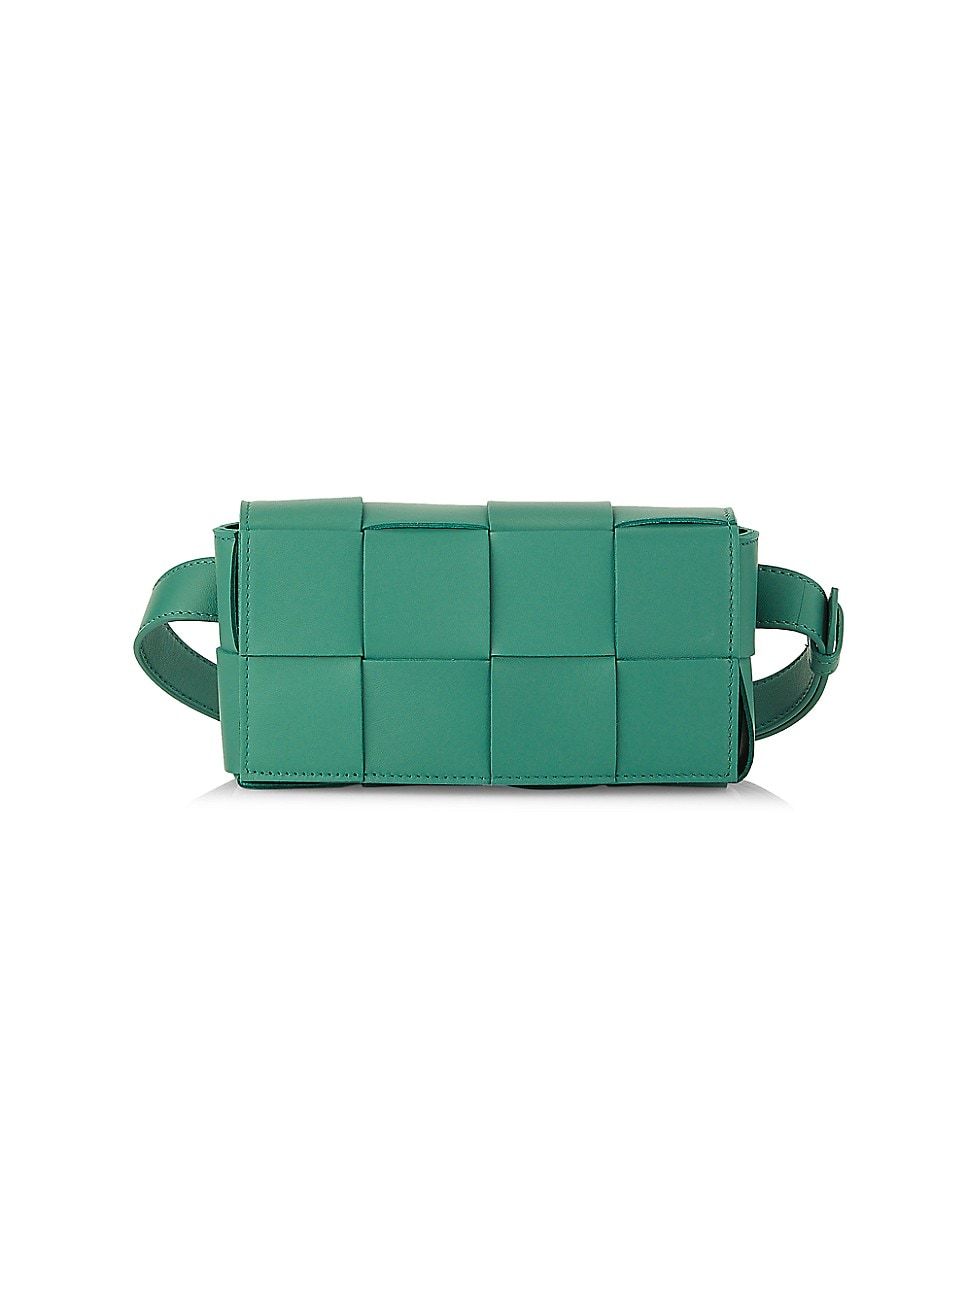 <p><strong>$2100.00</strong></p><p>Bottega Veneta's heritage intrecciato pattern stands out on this woven belt bag, thanks to the bold green color. Opt for this bright style to bring a pop of color to any ensemble; this hue pairs just as well with a coordinated color story as it does all black.</p><p><strong>Size:</strong> 7 "W x 3.75 "H x 2 "D</p><p><strong>Material:</strong> Leather </p><p><strong>Colors: </strong>Mermaid, Porridge Gold </p>